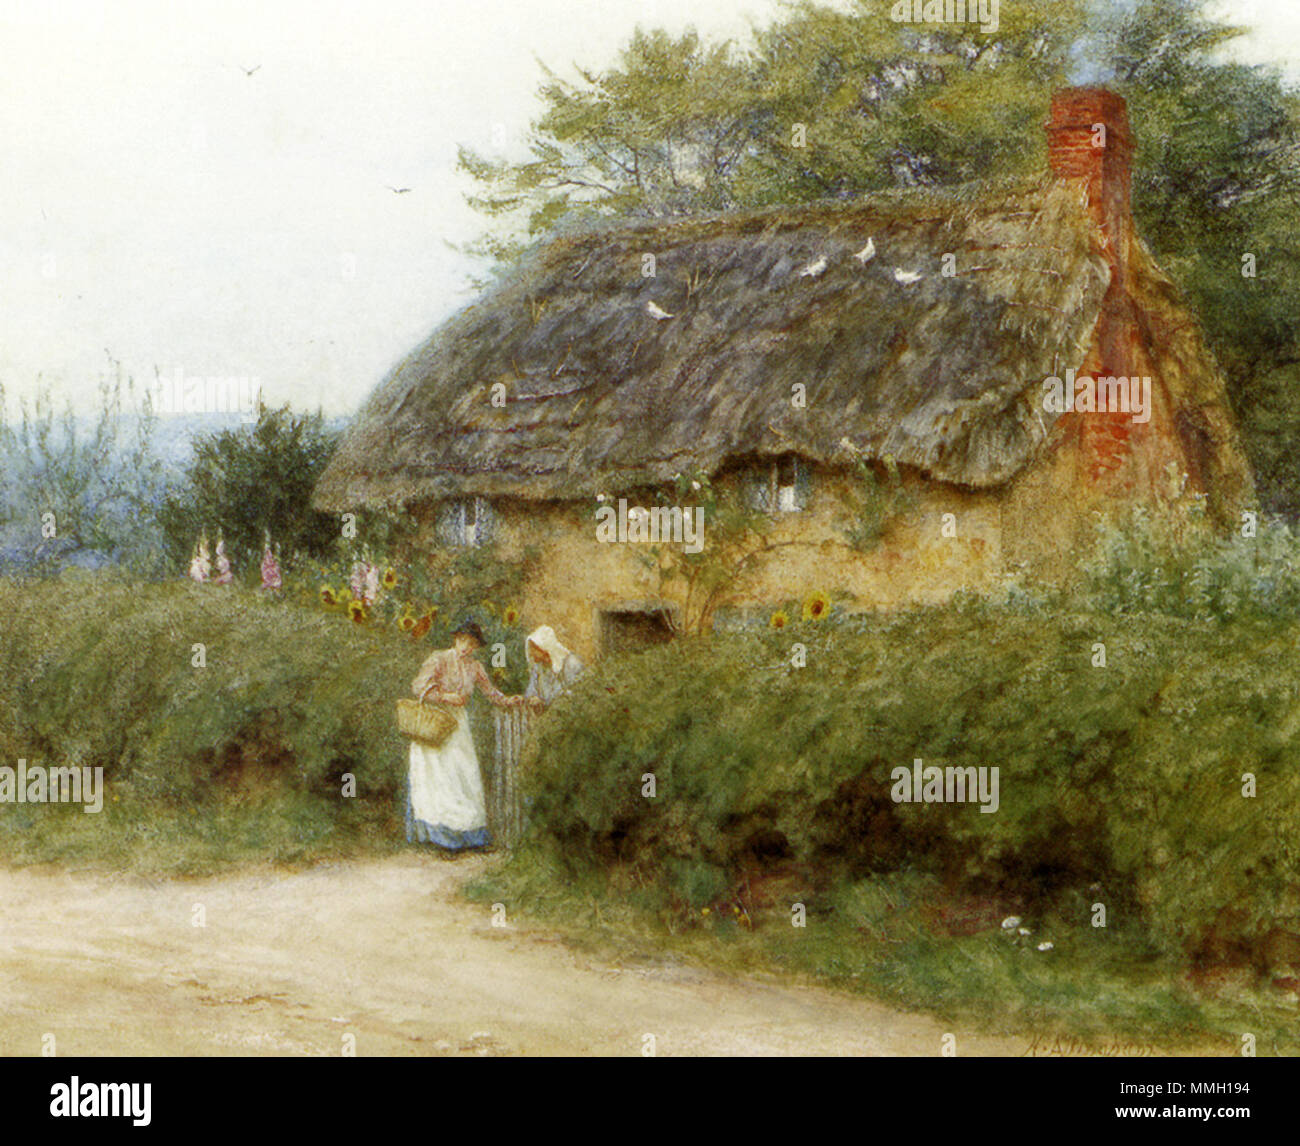 . Helen Allingham (26 September 1848 - 28 September 1926), was a well-known watercolour painter illustrator of the Victorian era. A Cottage With Sunflowers  . 2008 (upload date).   Helen Allingham  (1848–1926)     Alternative names H. Paterson  Description British painter and illustrator  Date of birth/death 26 September 1848 28 September 1926  Location of birth/death Derbyshire Haslemere  Authority control  : Q444581 VIAF:?34727518 ISNI:?0000 0000 8371 5642 ULAN:?500003736 LCCN:?n50021031 GND:?119120836 WorldCat 39 Allingham Helen A Cottage With Sunflowers At Peaslake Stock Photo